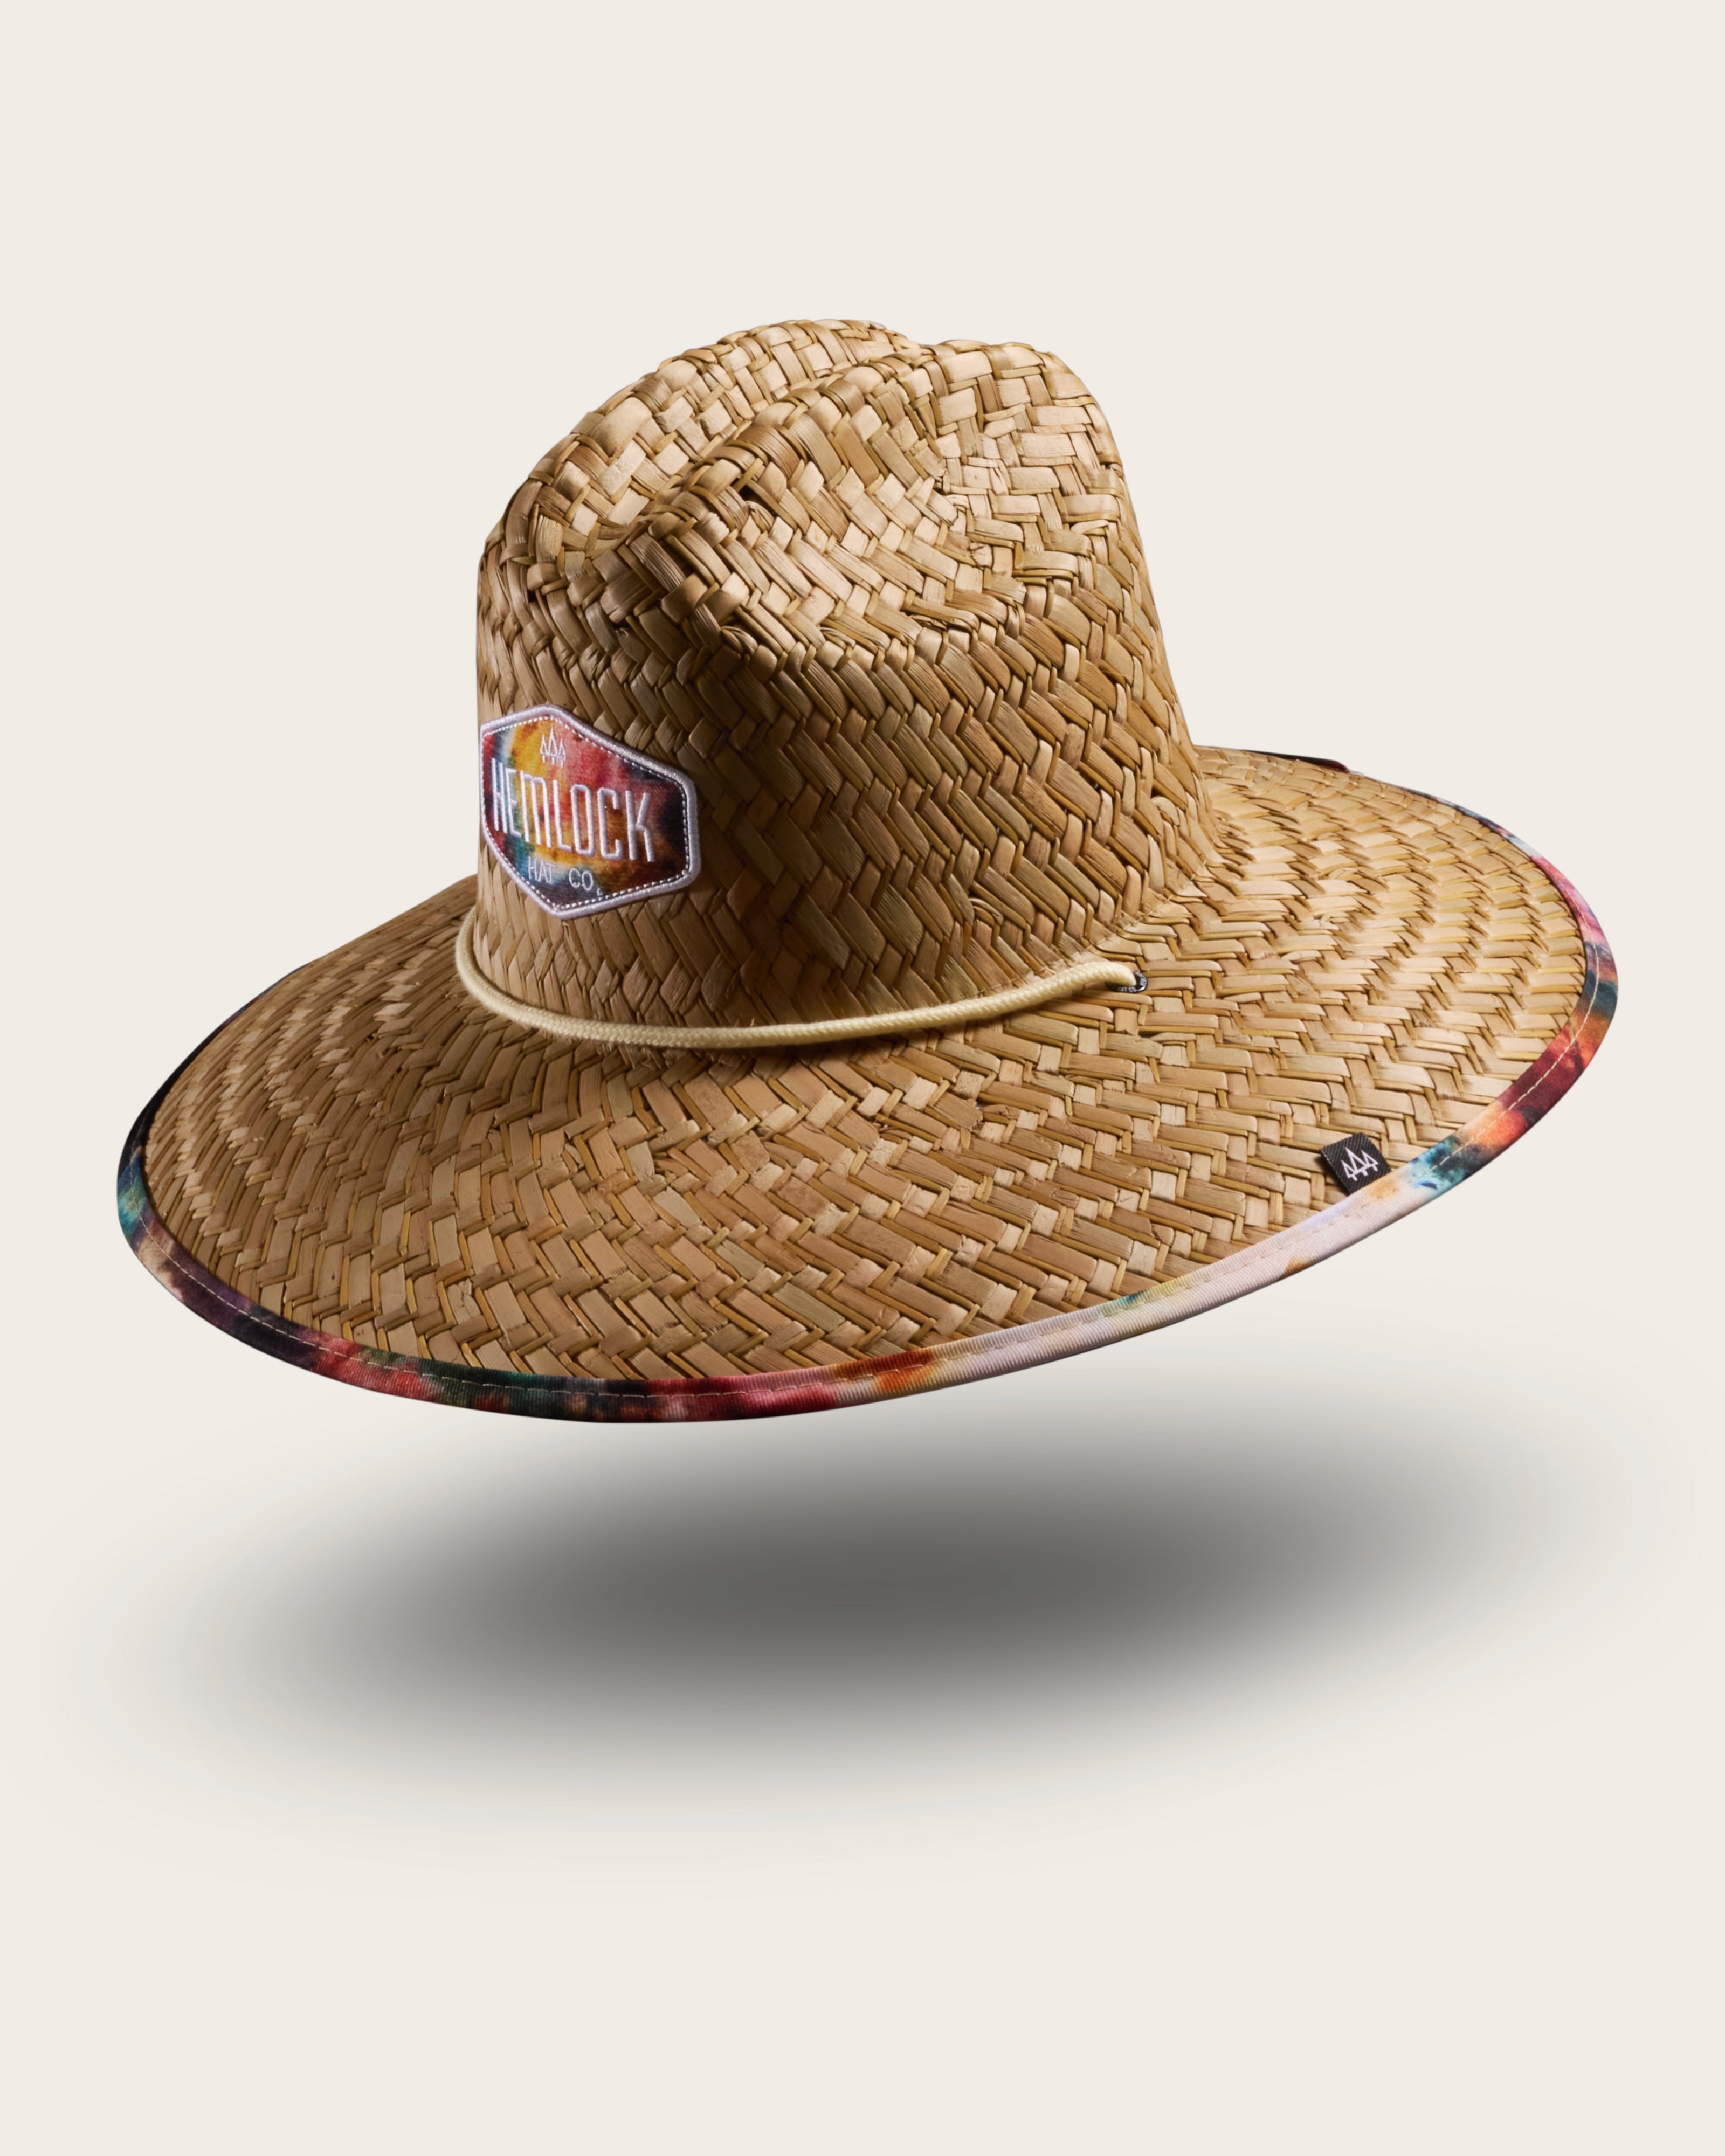 Hemlock Bowie straw lifeguard hat with Tie Dye pattern with patch